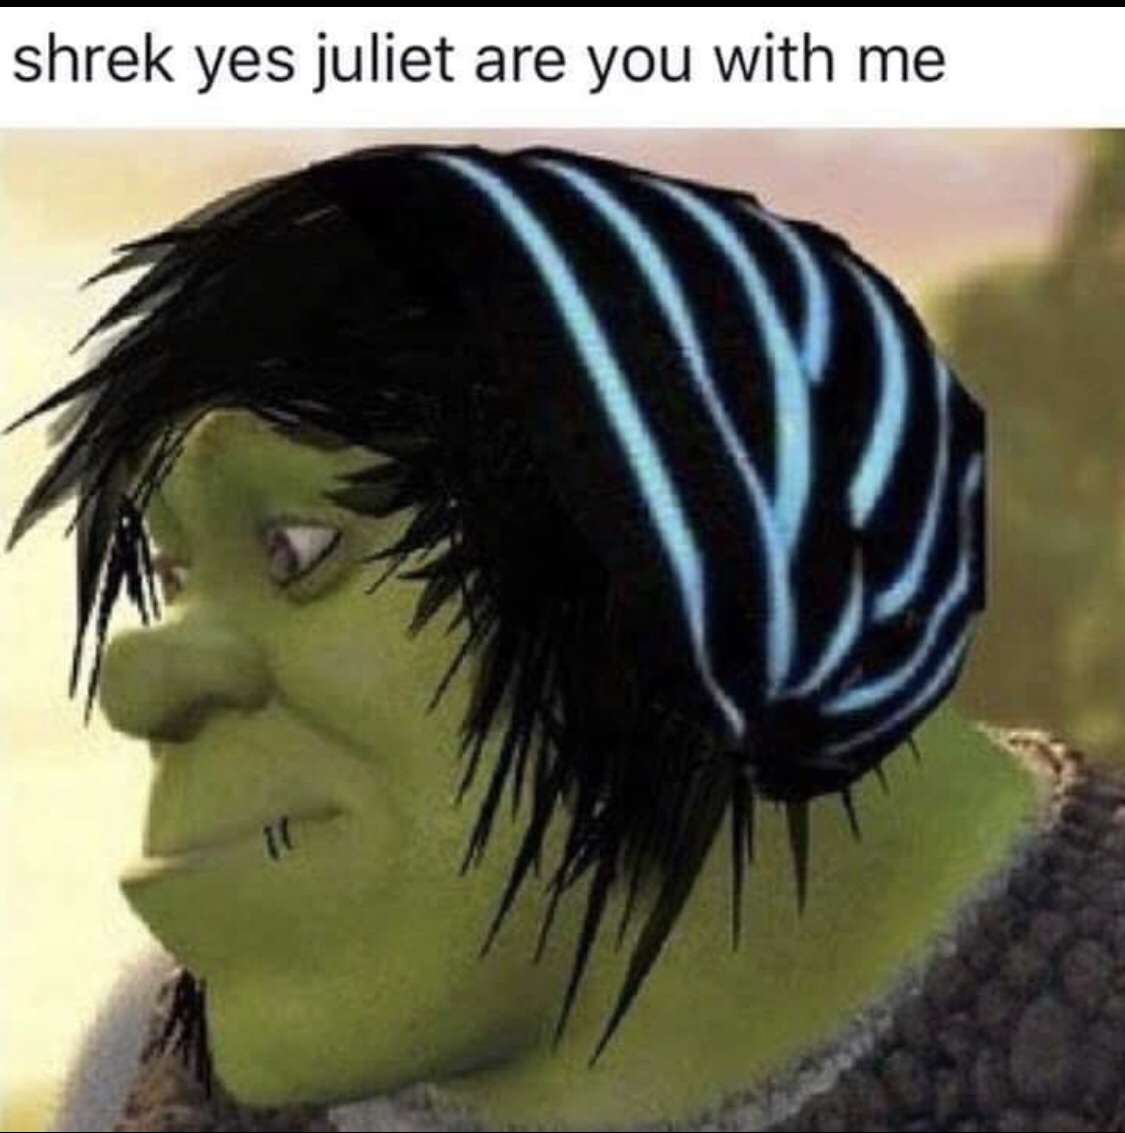 shrek yes juliet - shrek yes juliet are you with me